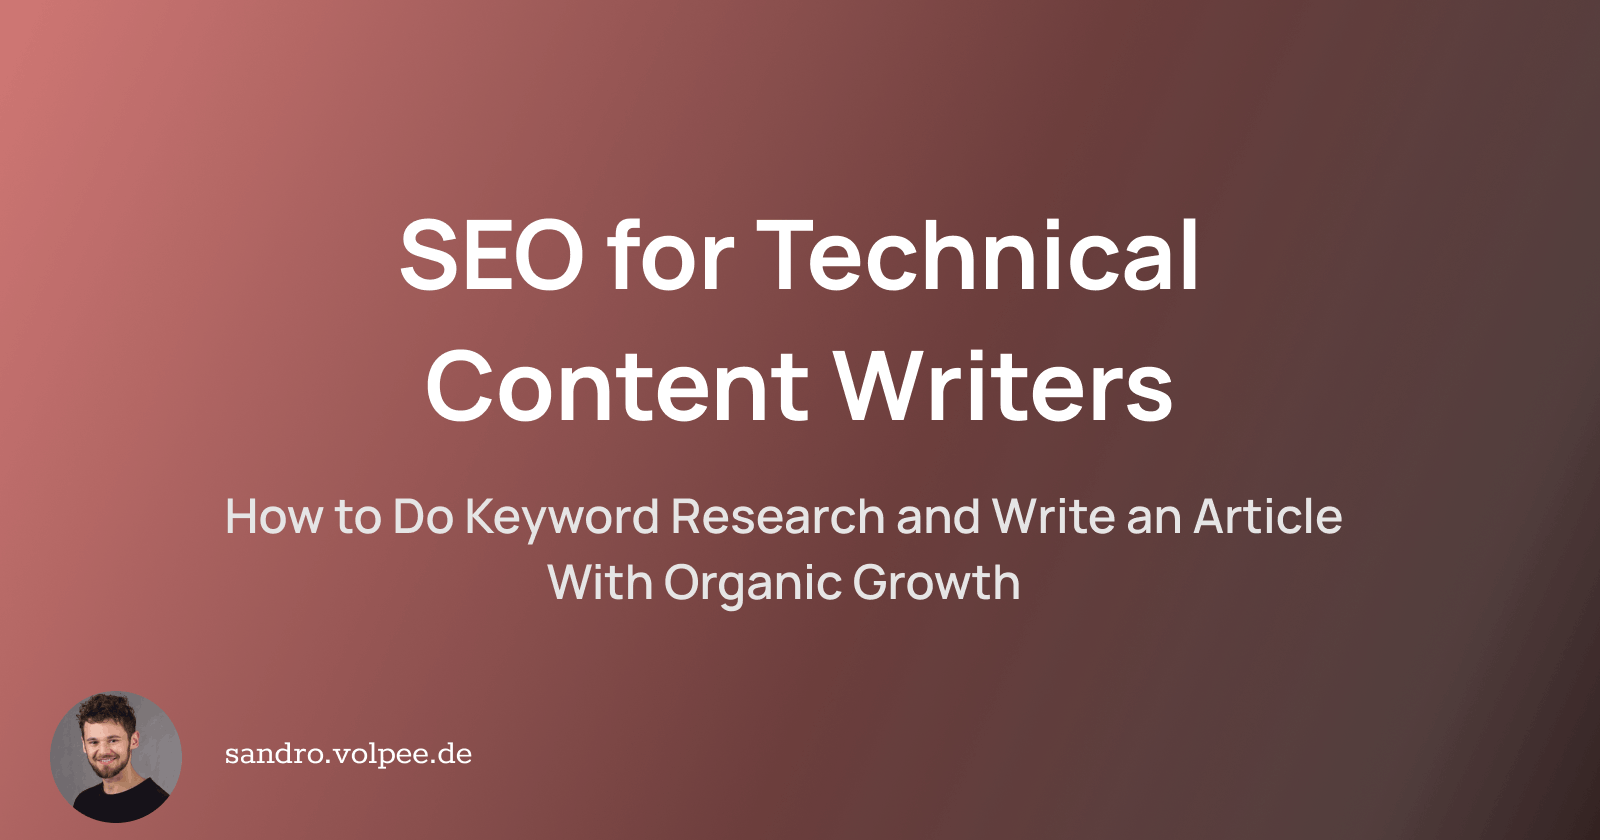 SEO for Technical Content Writers